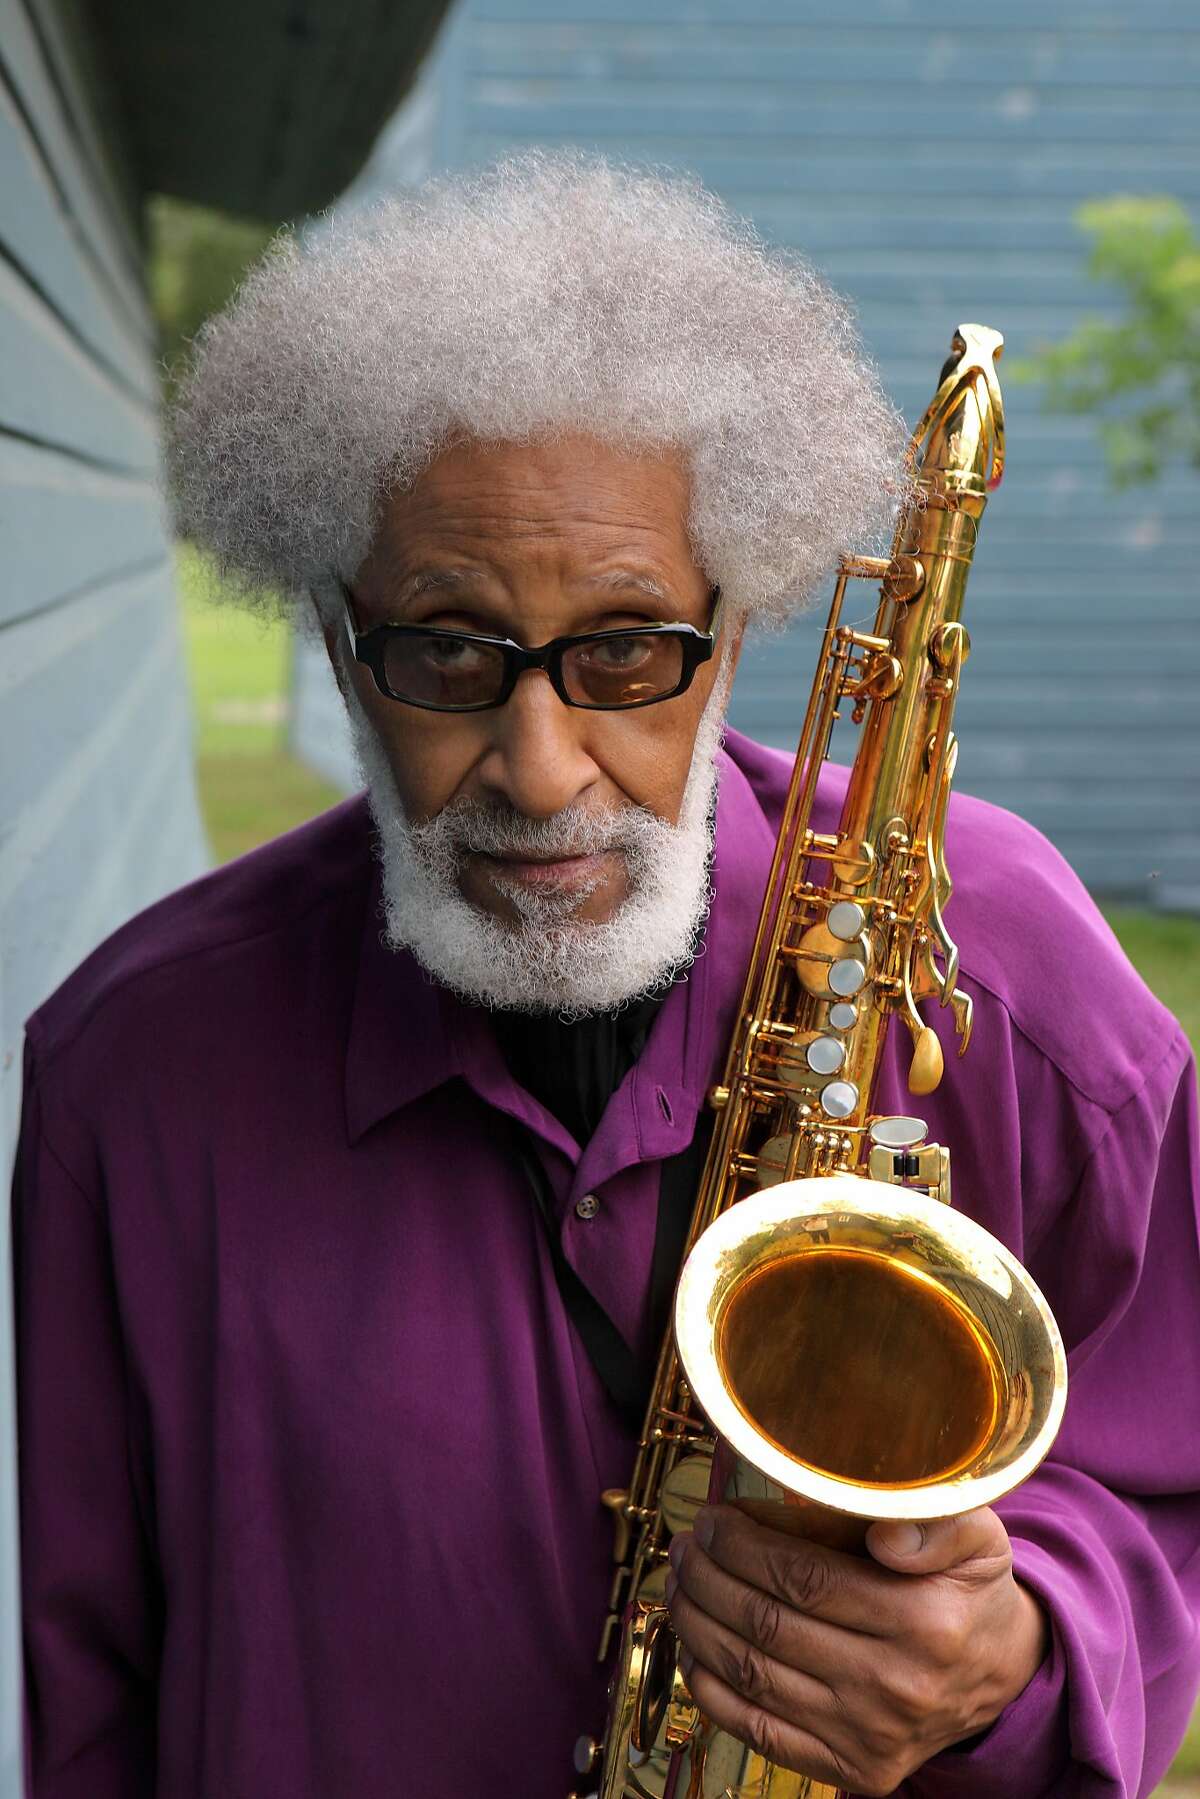 The towering tenor saxophonist and composer Sonny��Rollins will be honored with a musical tribute at the 60th annual Monterey Jazz Festival by an all-star band featuring saxophonists Jimmy Heath, Joe Lovano, Branford Marsalis and Joshua Redman.